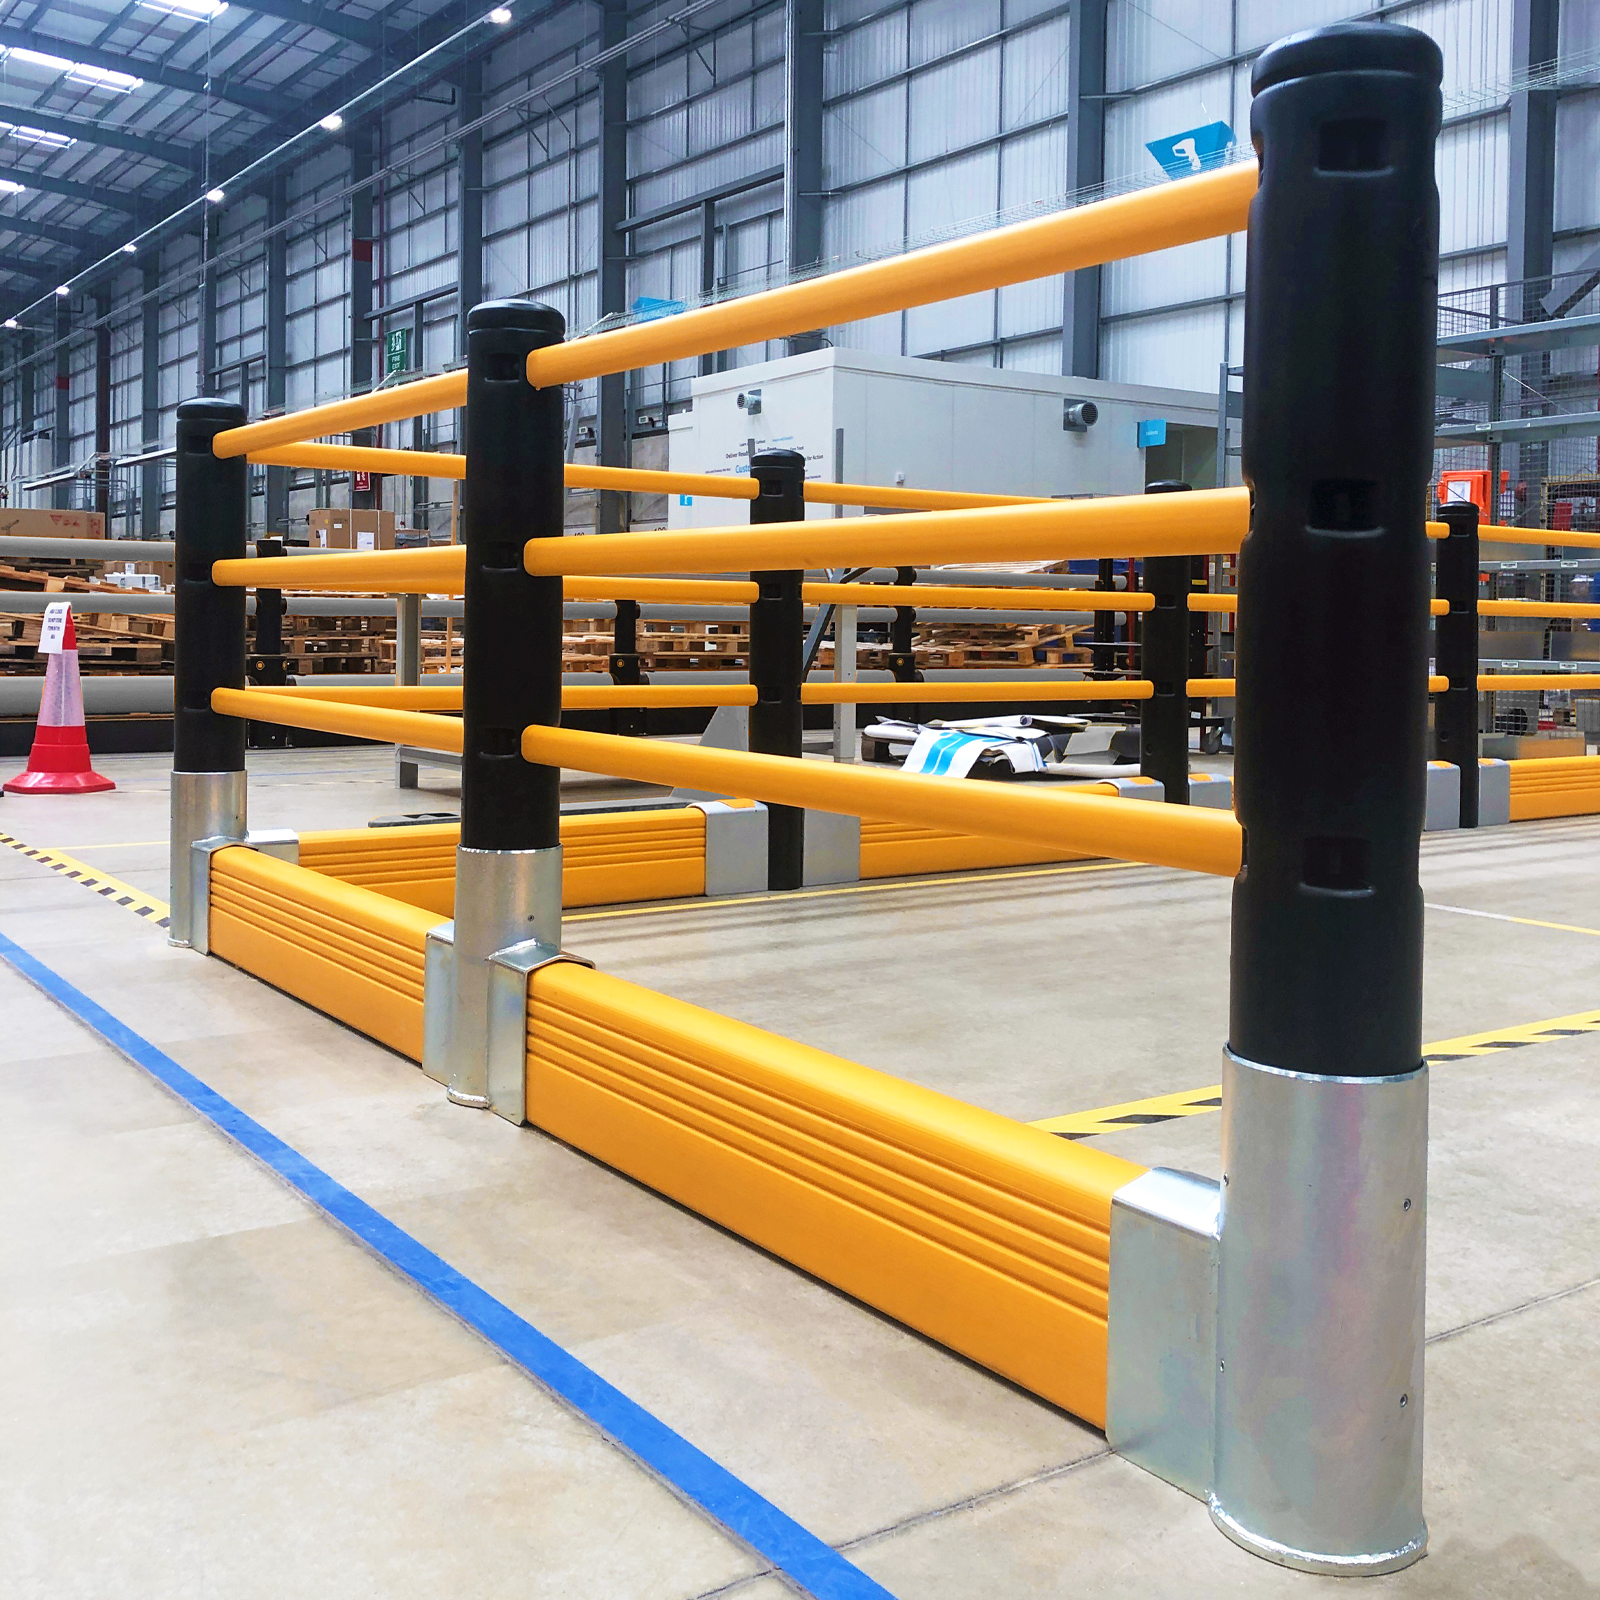 McCue Pedestrian Barrier Safety Protection with Floor Mounted Crash Barrier PLUS in Warehouse